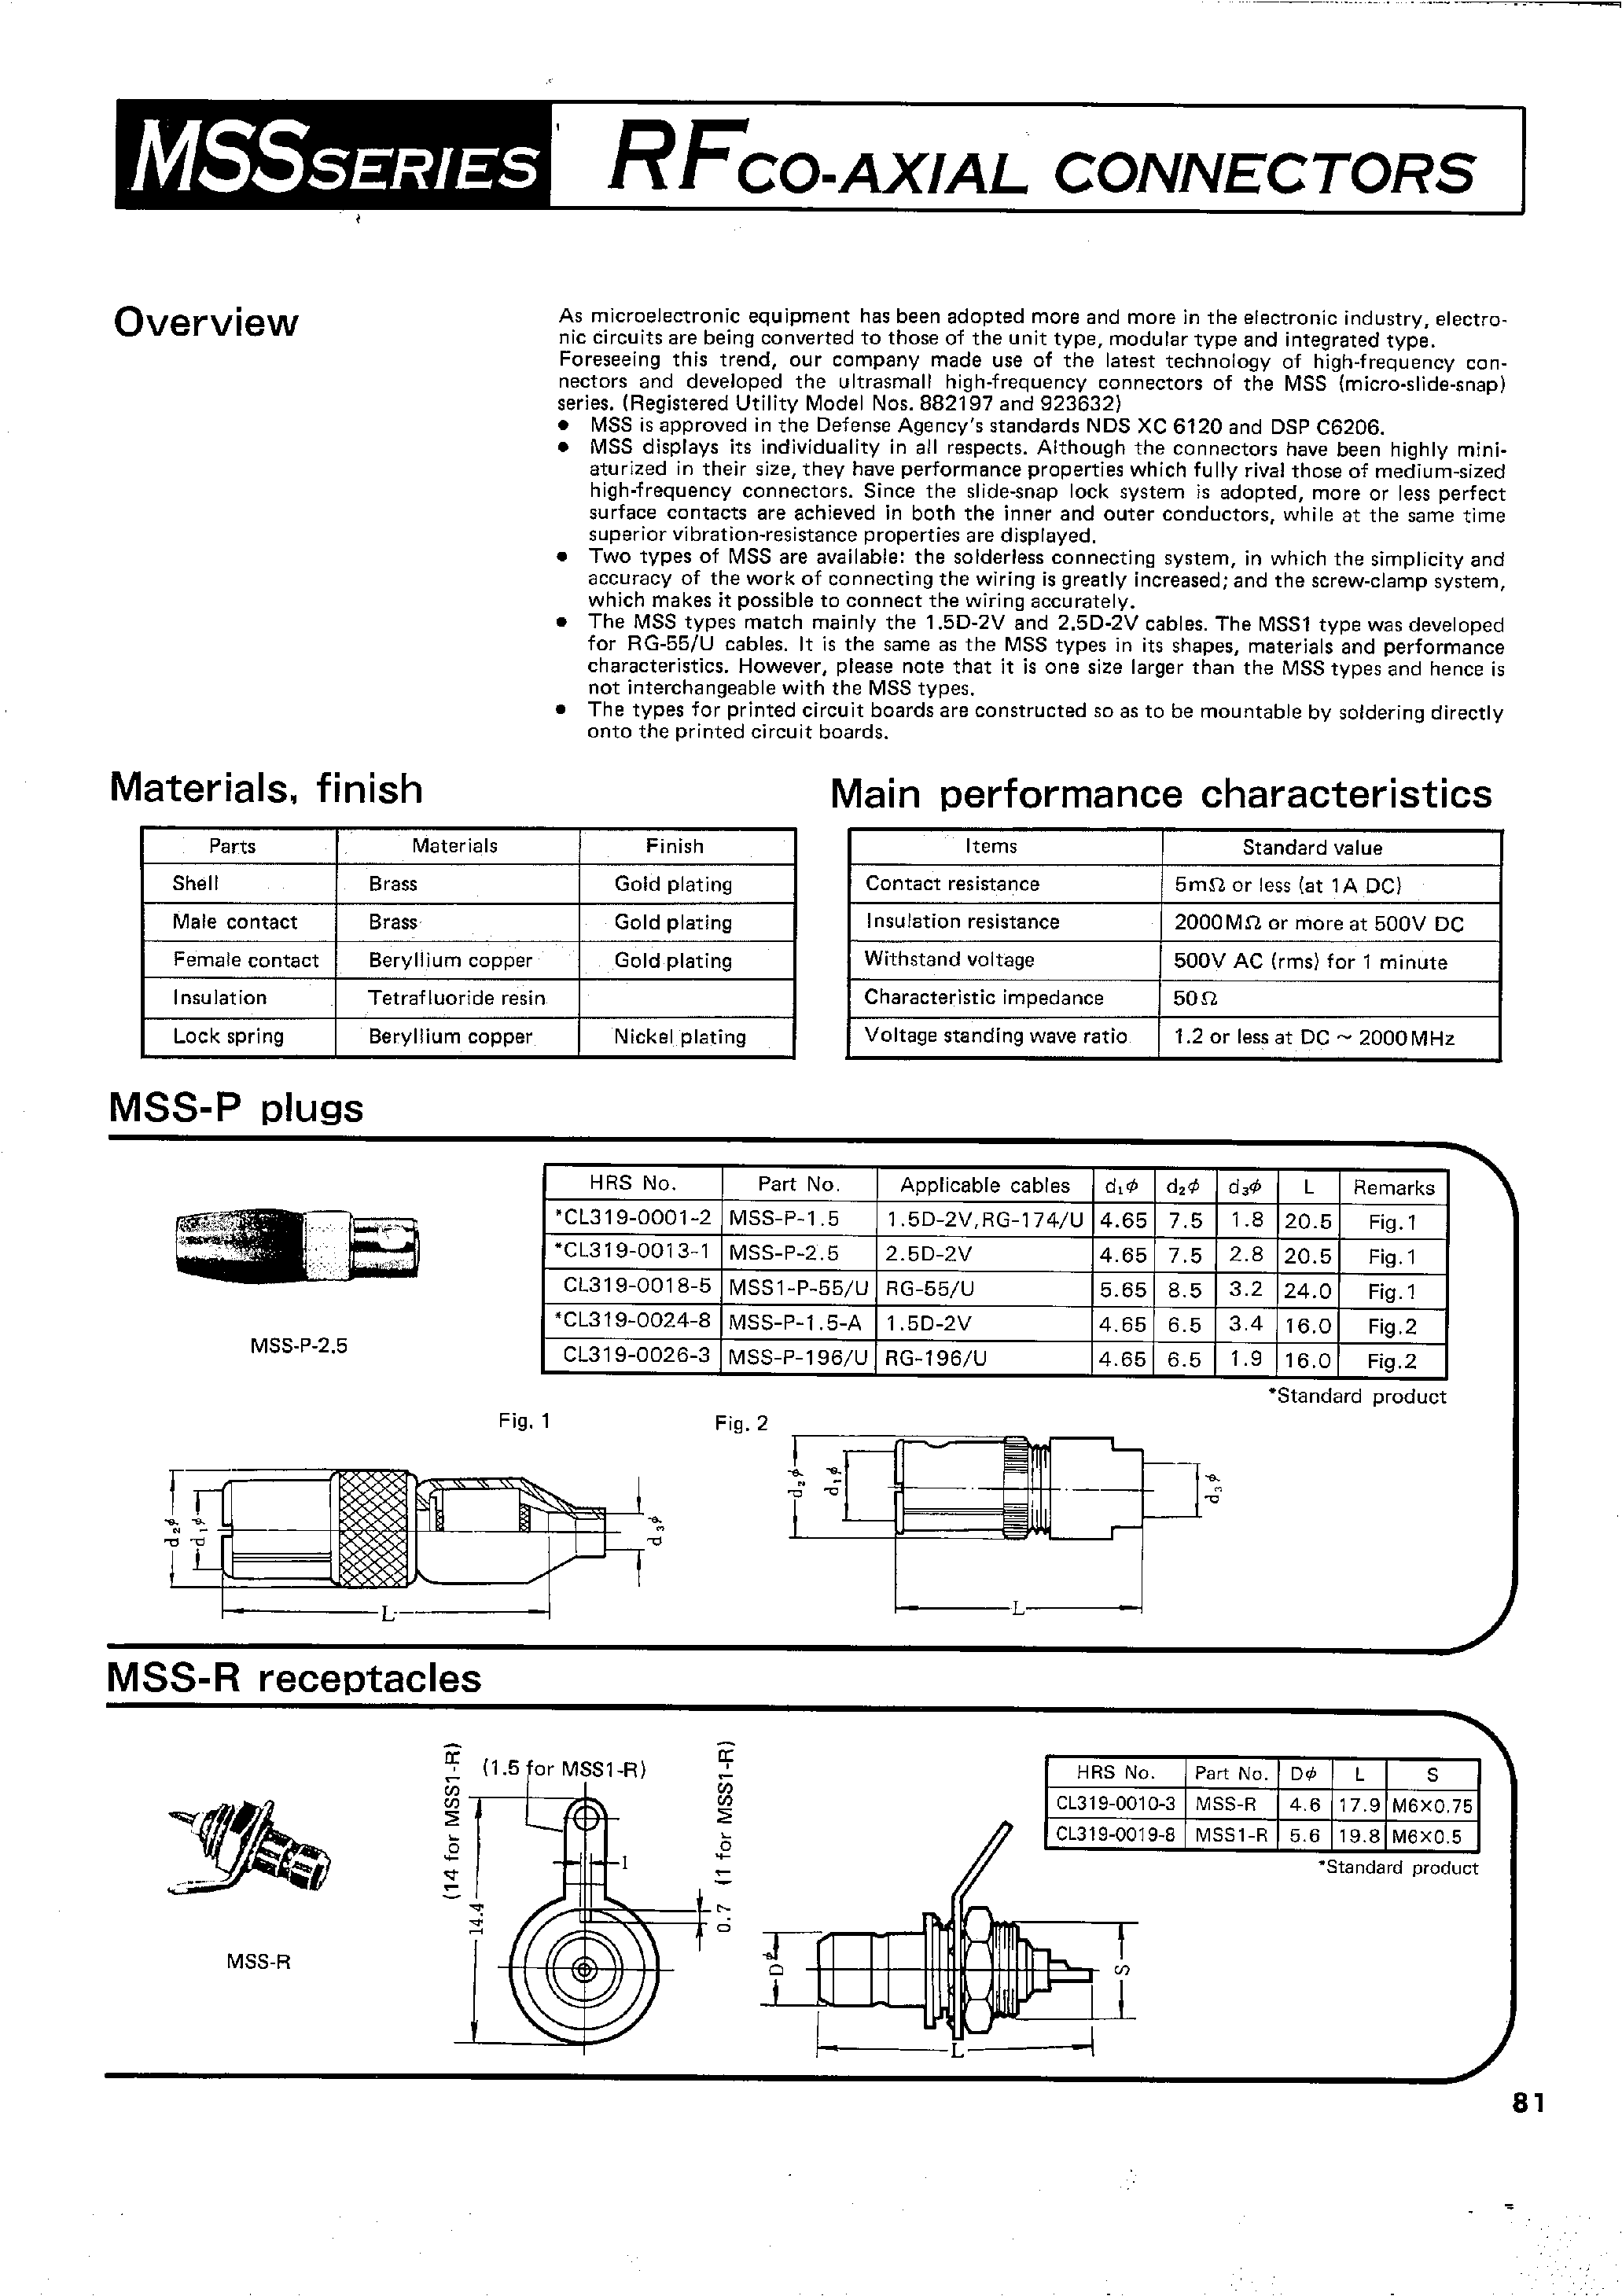 Datasheet CL319-0007-9 - RFCO-AXIAL CONNECTORS page 1